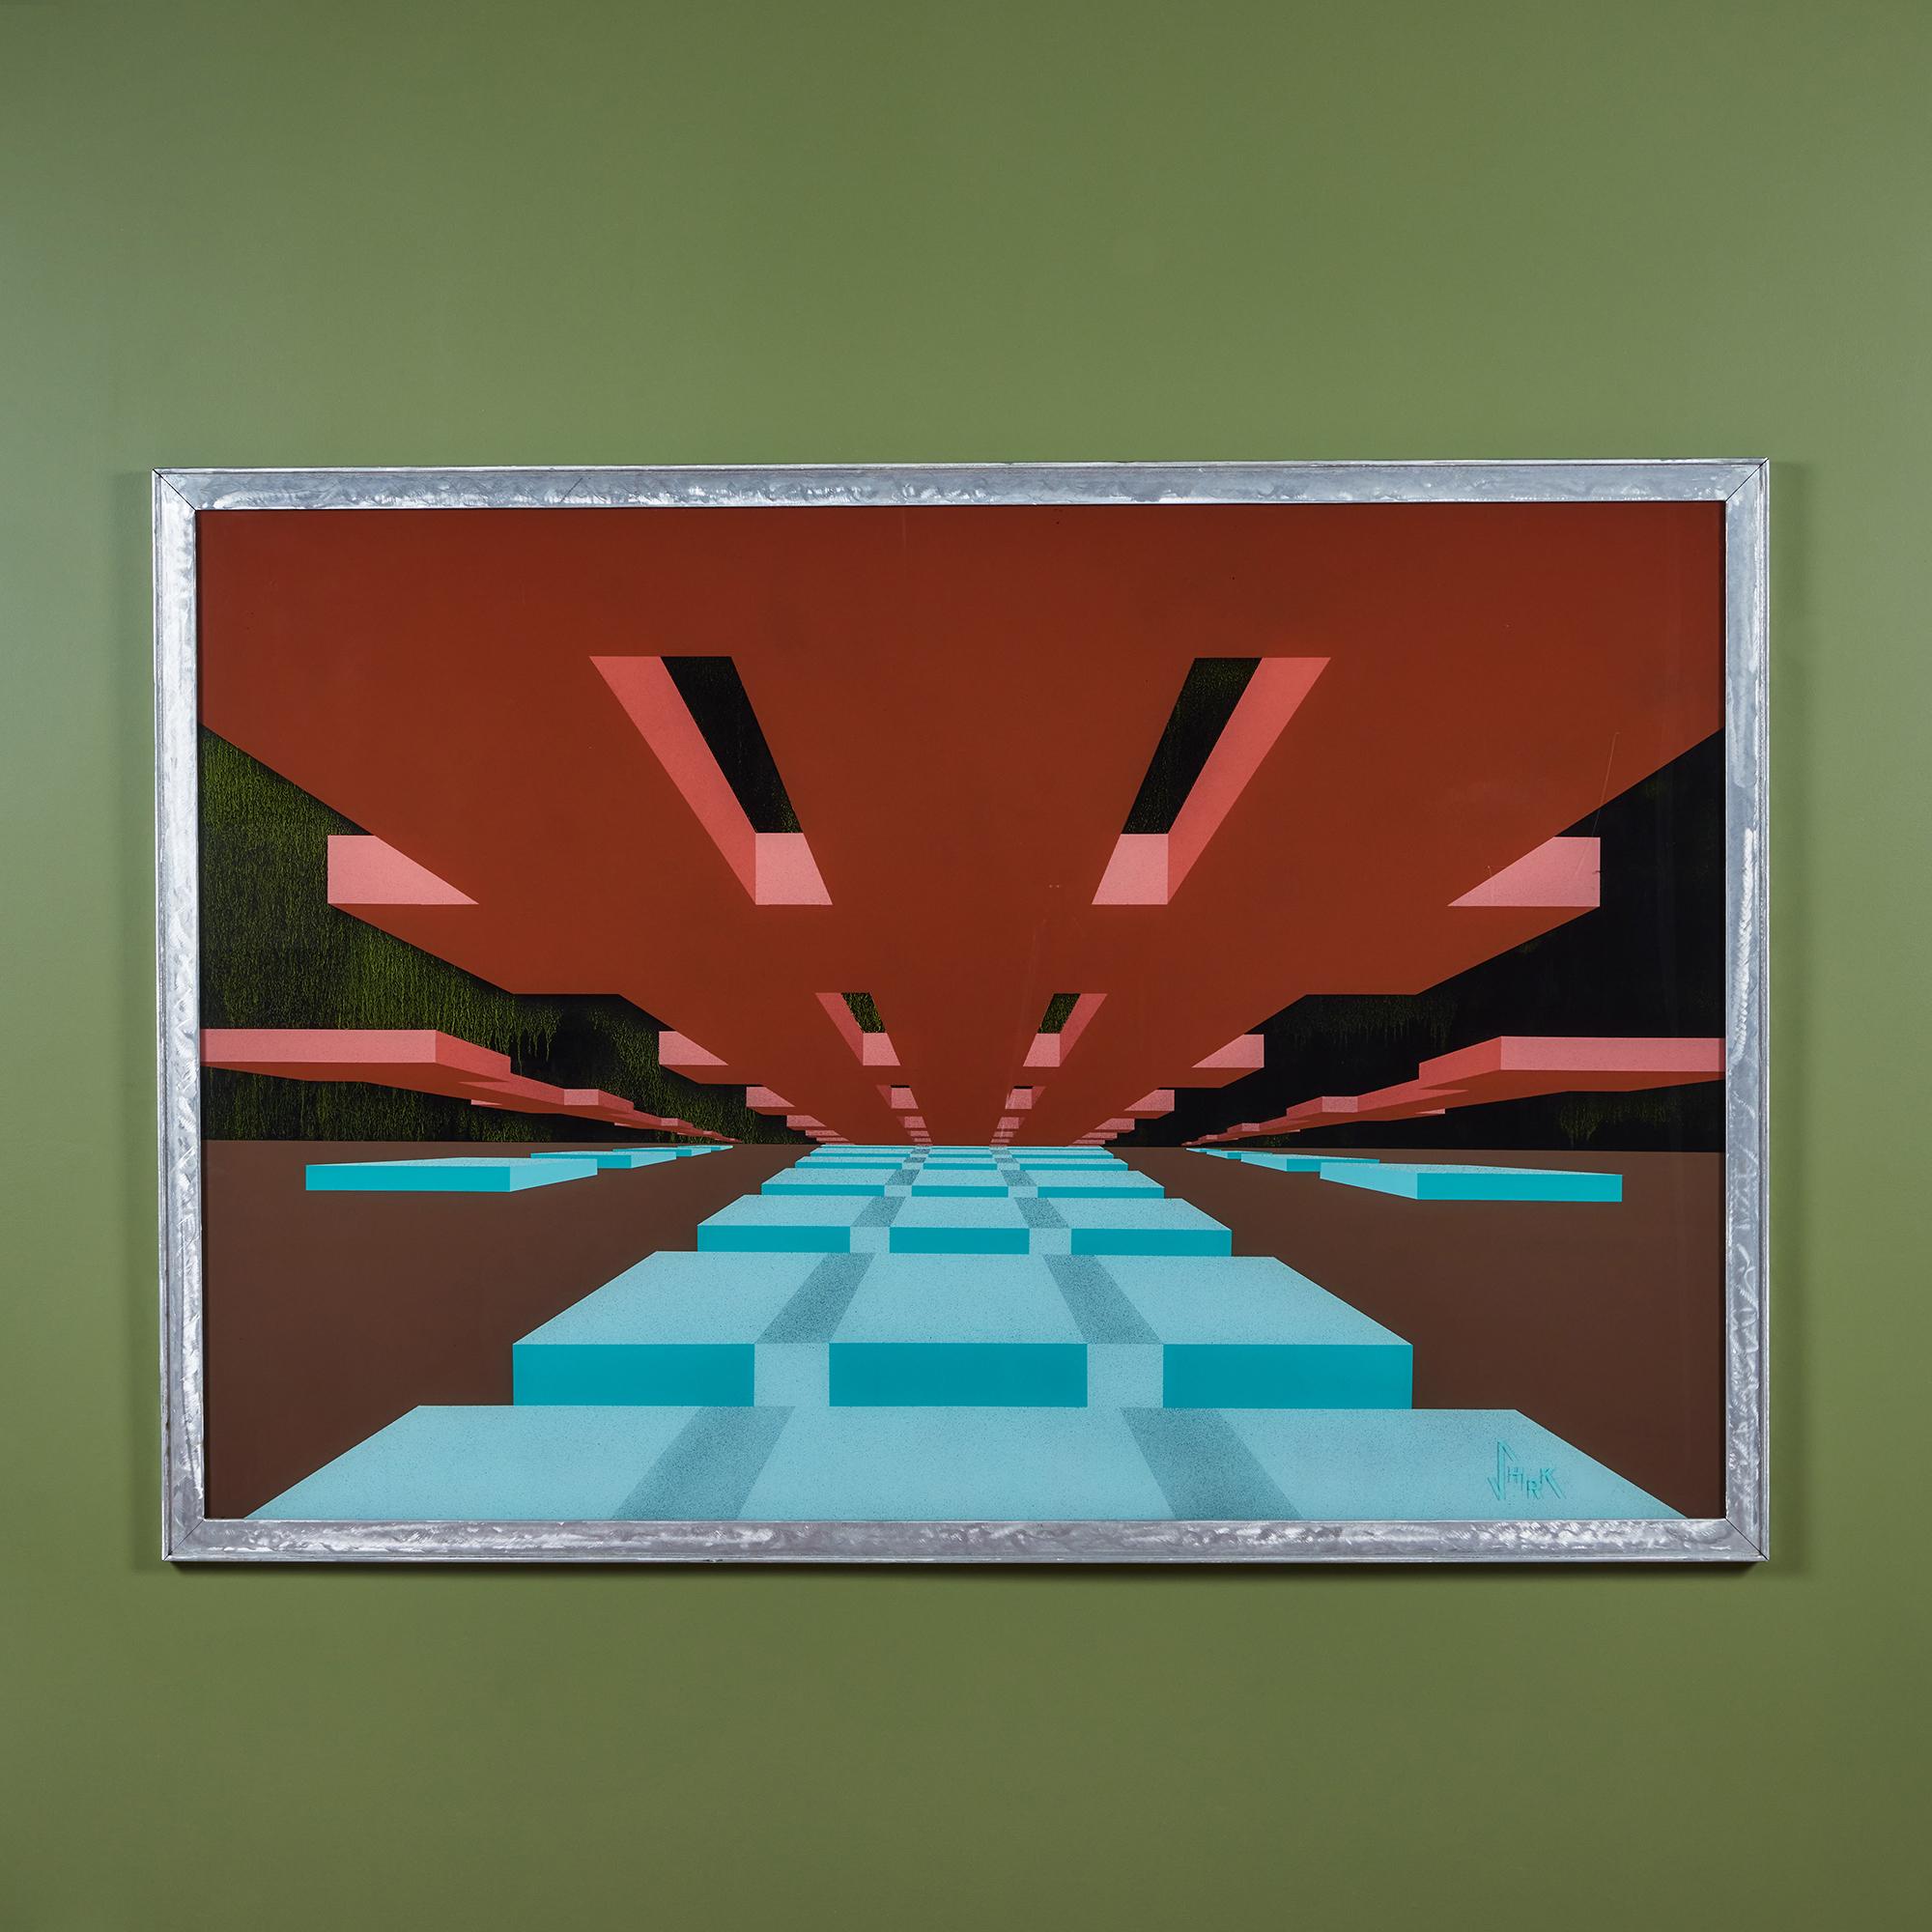 Painting by American artist Robert Shirk captures playful illusions by painting layered plexiglass to bring to life a visually pleasing images. This large scale framed artwork showcases geometric shapes that appear to make up a cityscape in colors